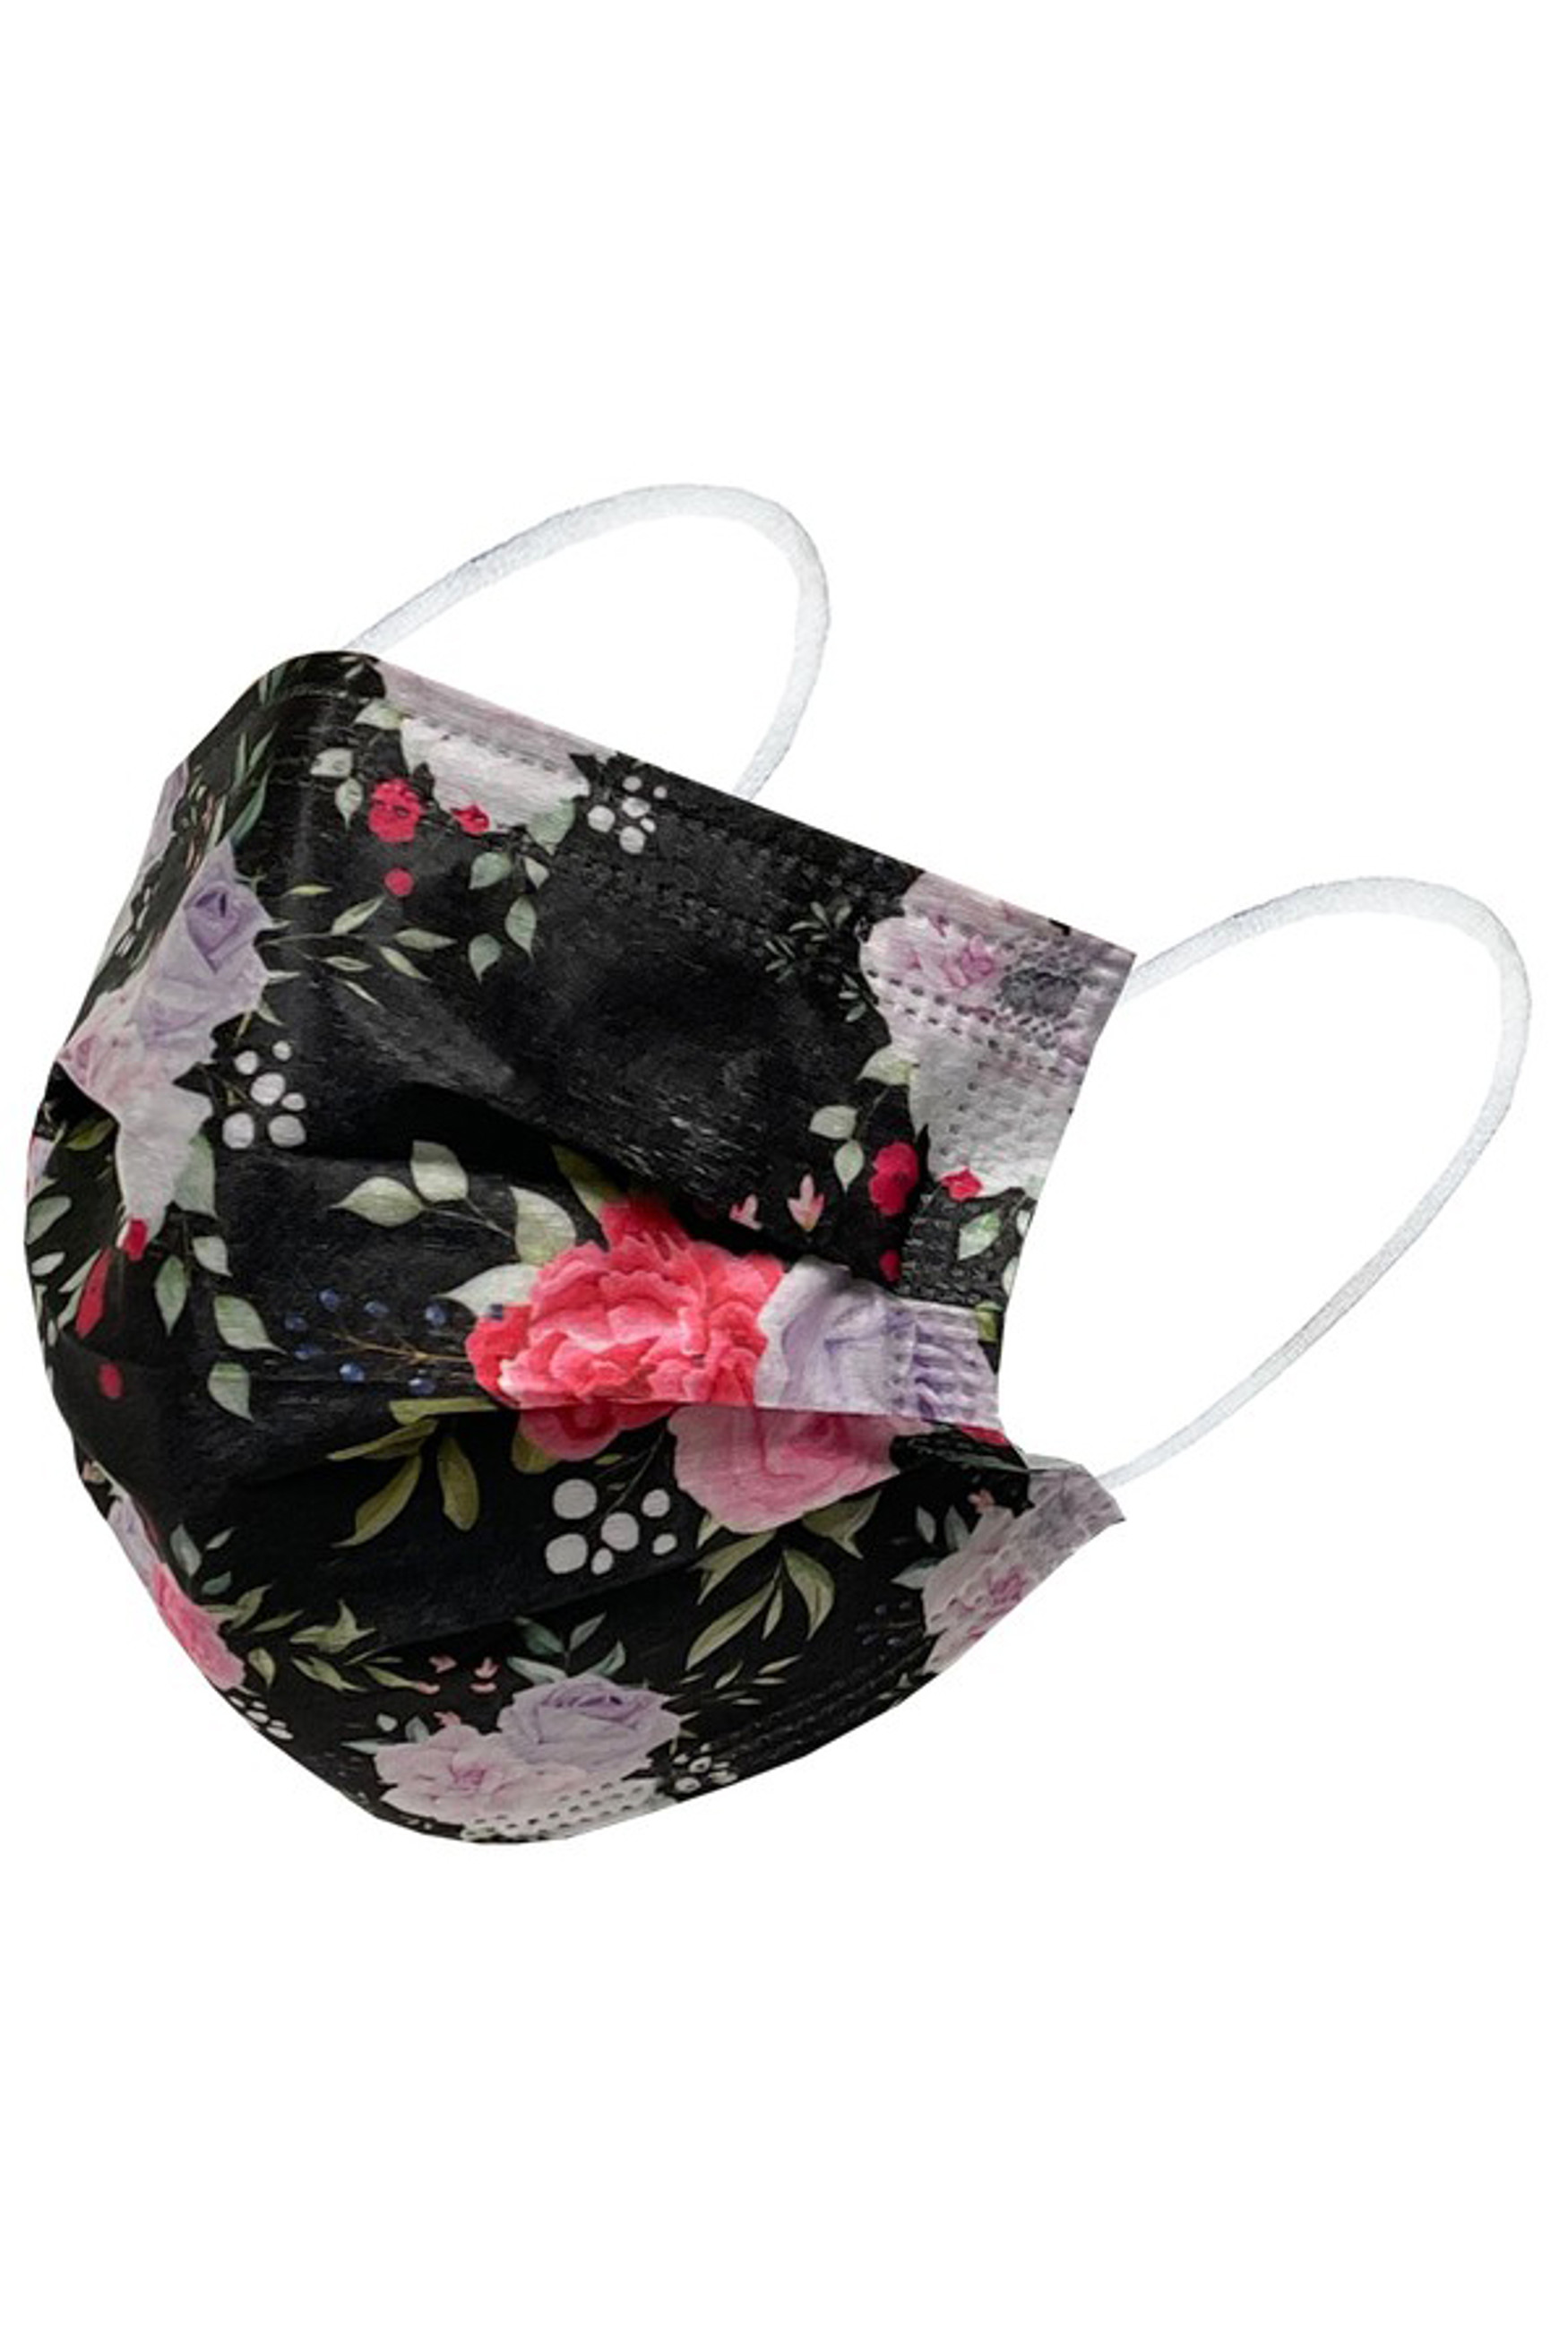 Multi Style Floral Disposable Surgical Face Mask - 50 Pack - 2 Styles